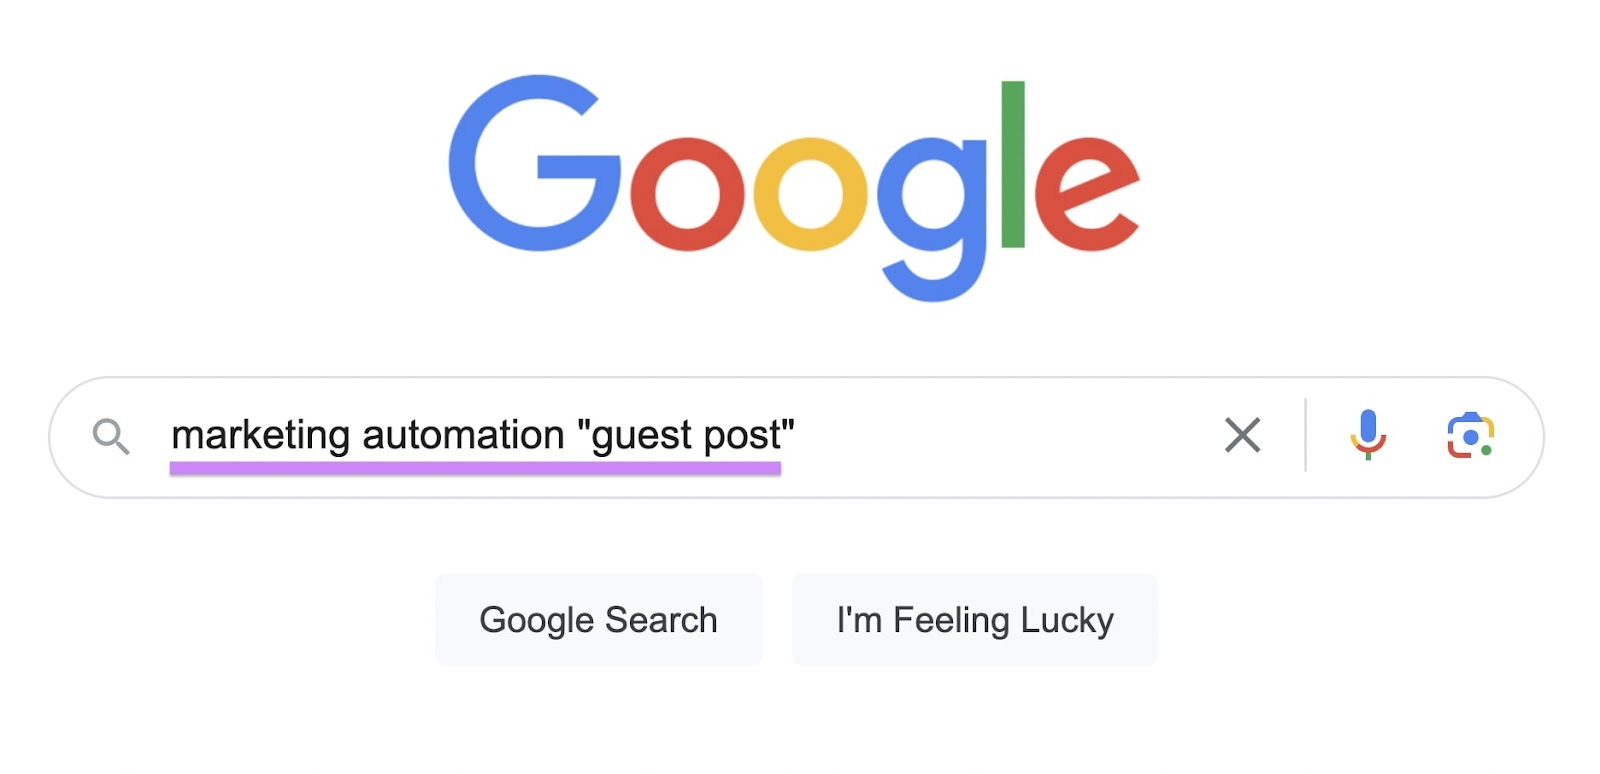 Google hunt  barroom  with selling  automation "guest post" successful  it.